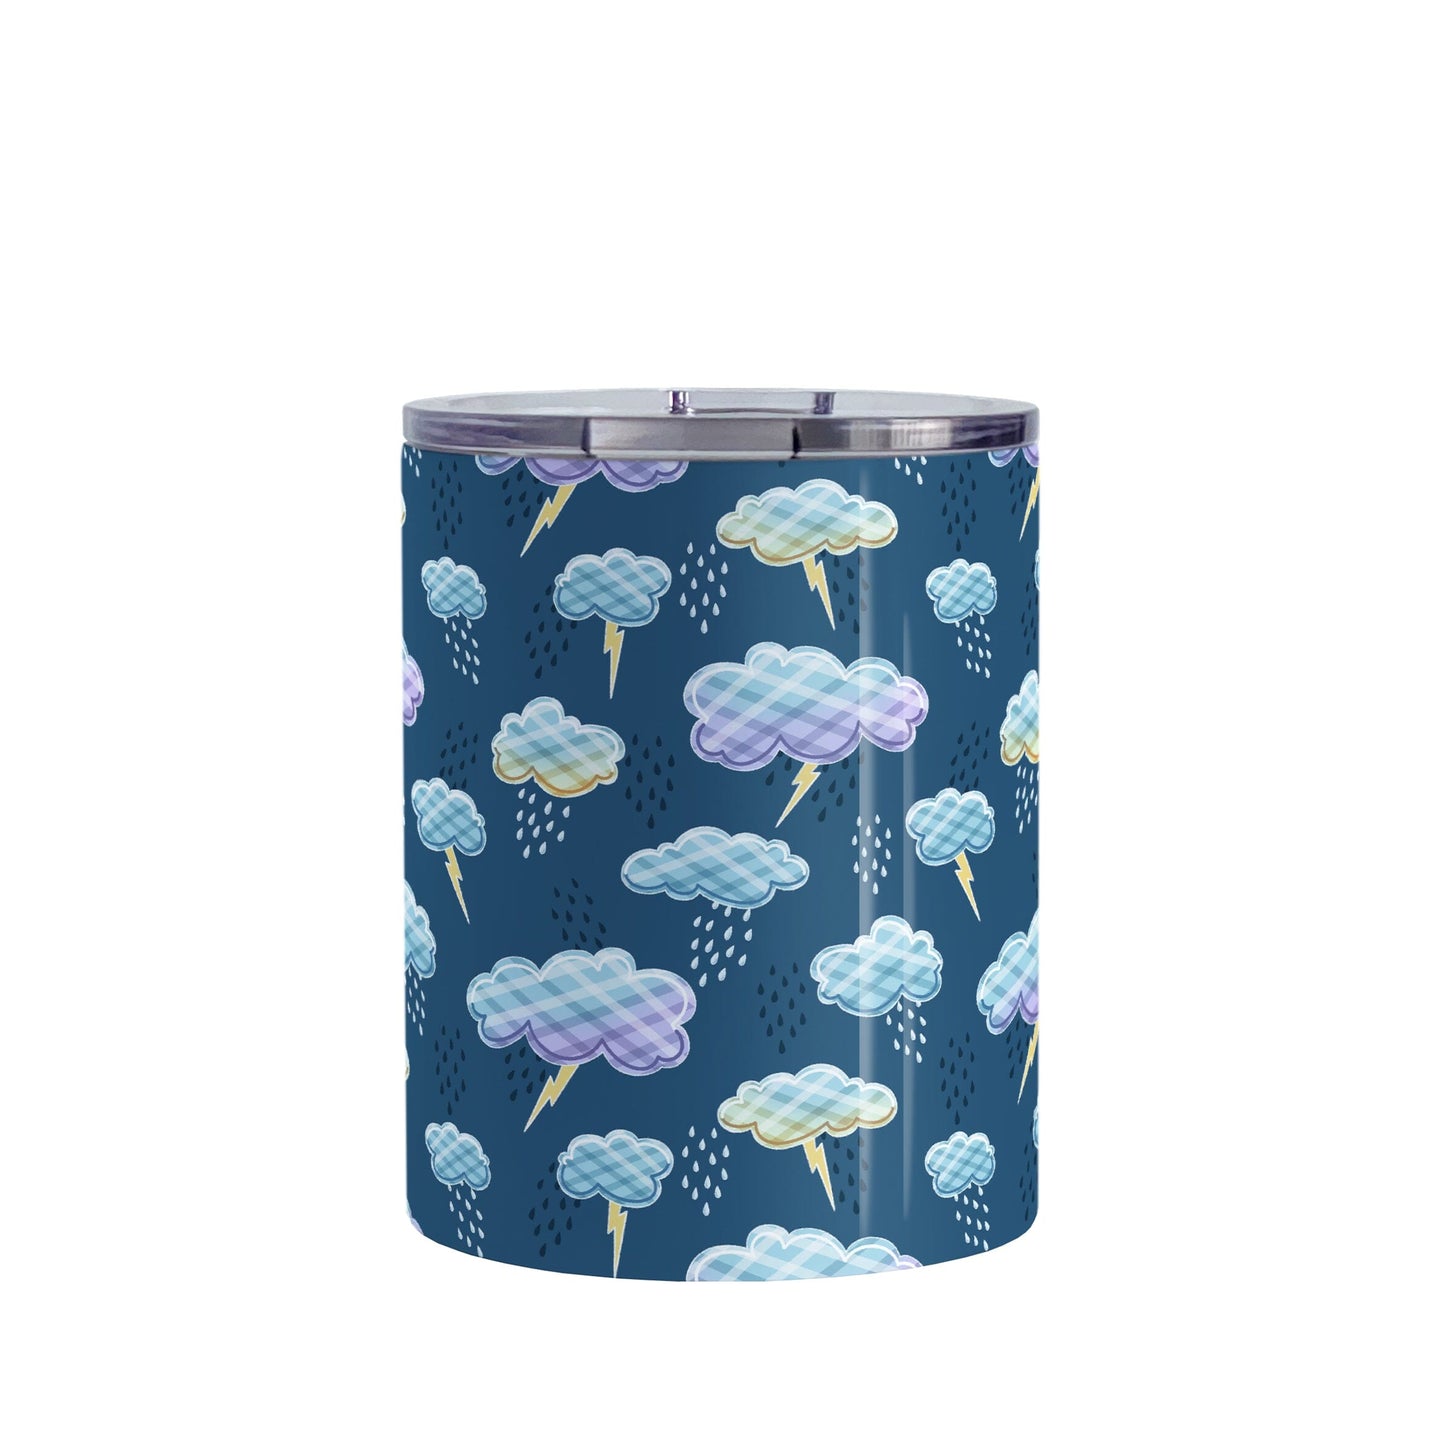 My Thunderstorm Tumbler Cup (10oz) at Amy's Coffee Mugs. A stainless steel tumbler cup designed with an adorable thunderstorm pattern with cute illustrated storm clouds with a plaid-like pattern, lightning bolts, and rain over a dark blue background.